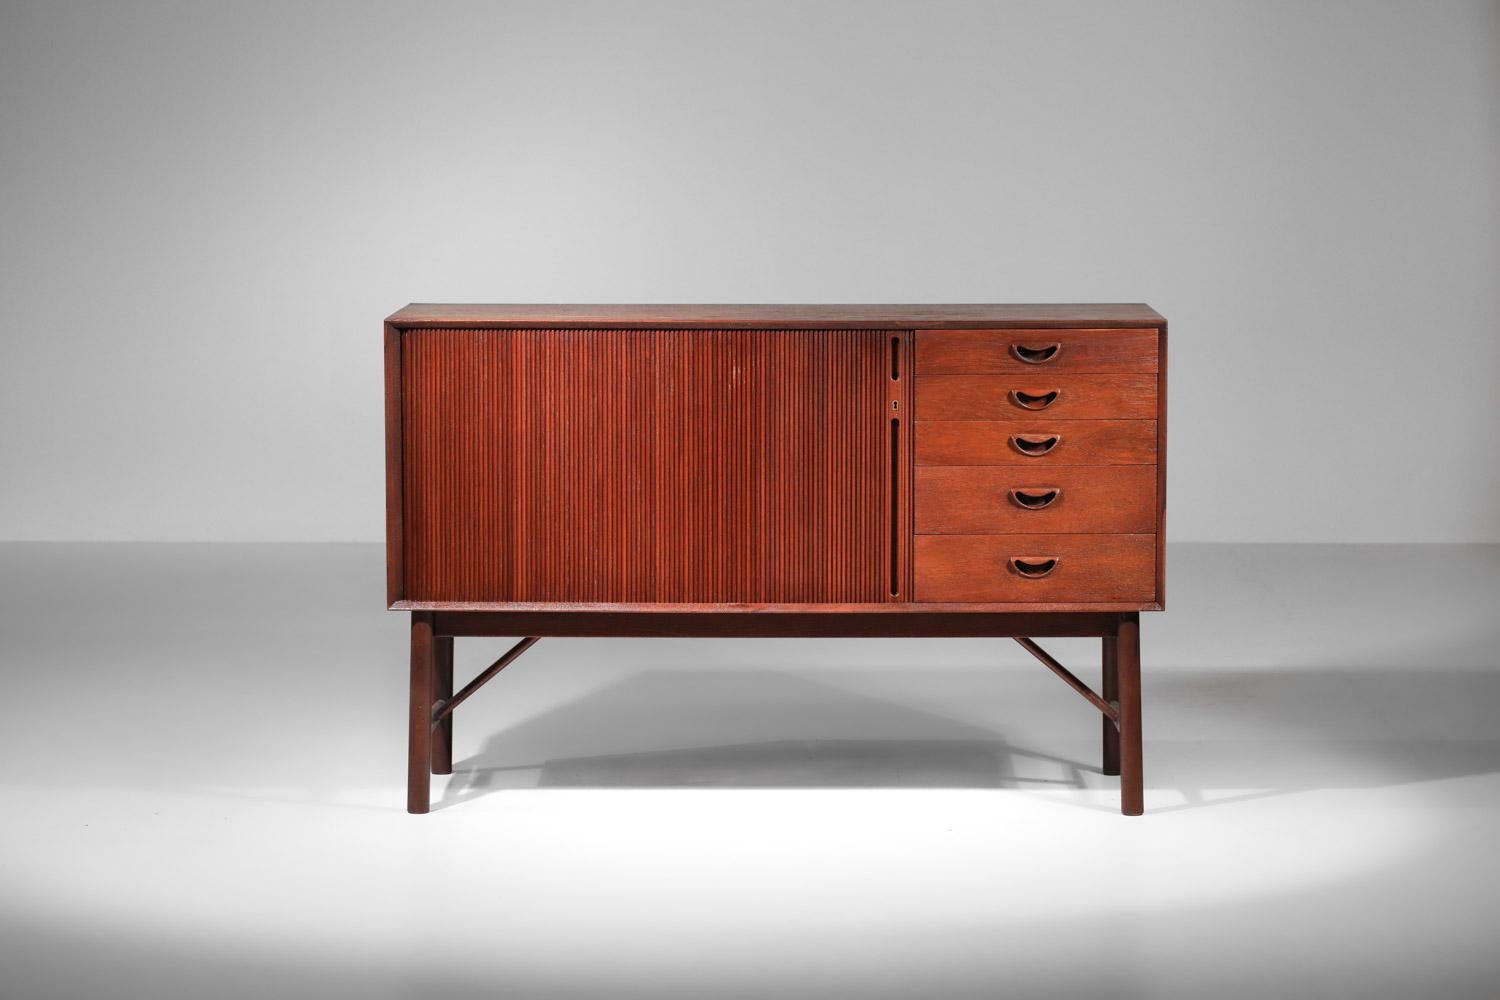 Danish sideboard from the 60s, designed by Danish designers Peter Hvidt and Orla Mølgaard-Nielsen. Solid teak structure, magnificent straight tail assembly on the sides. Composed of a column of 5 drawers on the right part and a sliding curtain door